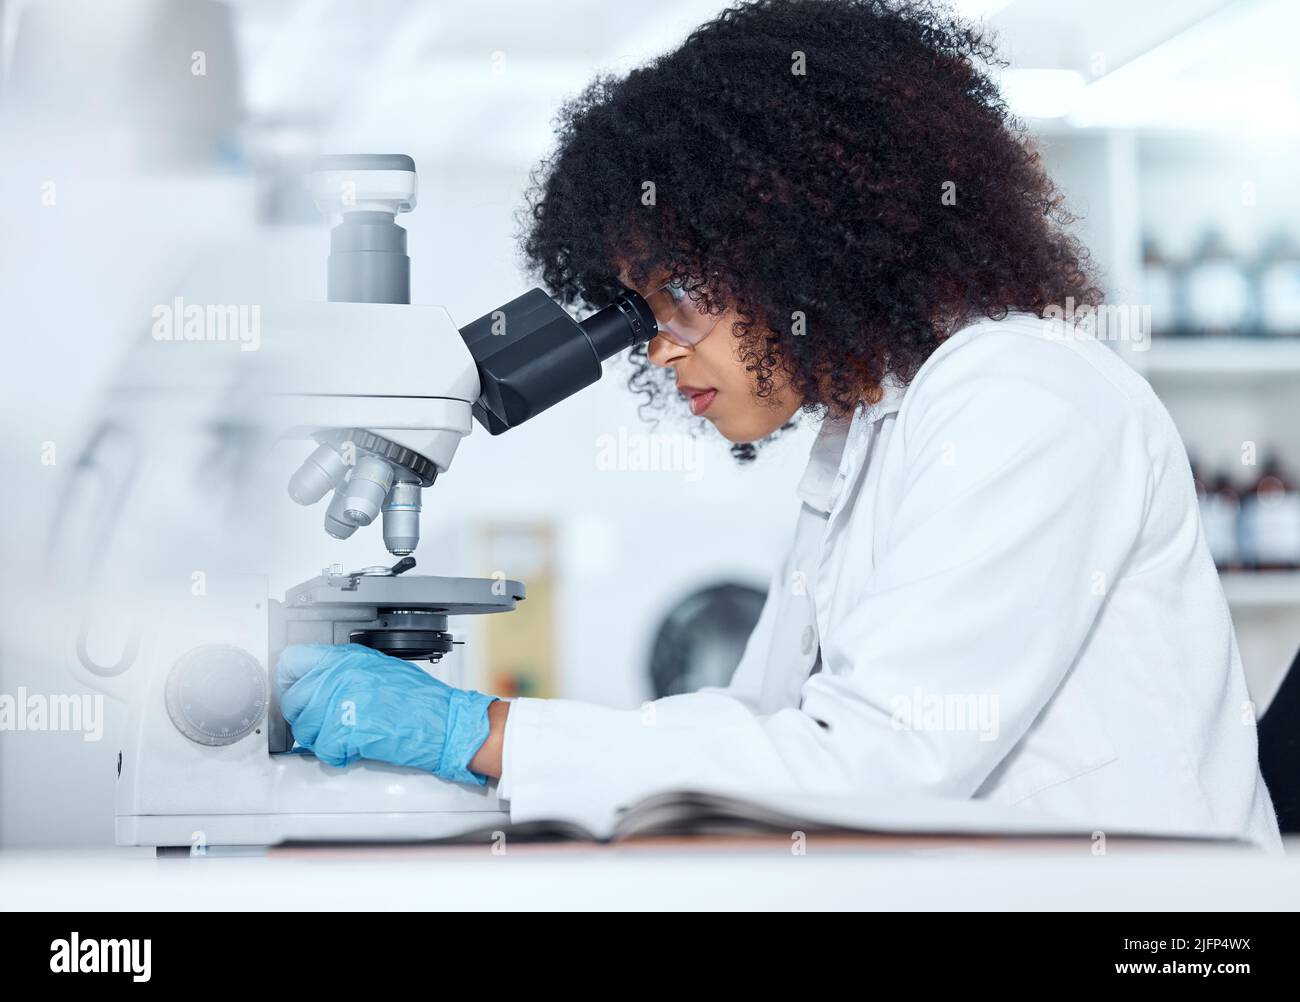 One mixed race scientist with curly hair wearing safety goggles and gloves analysing medical test samples on a microscope in a lab. Young woman doing Stock Photo